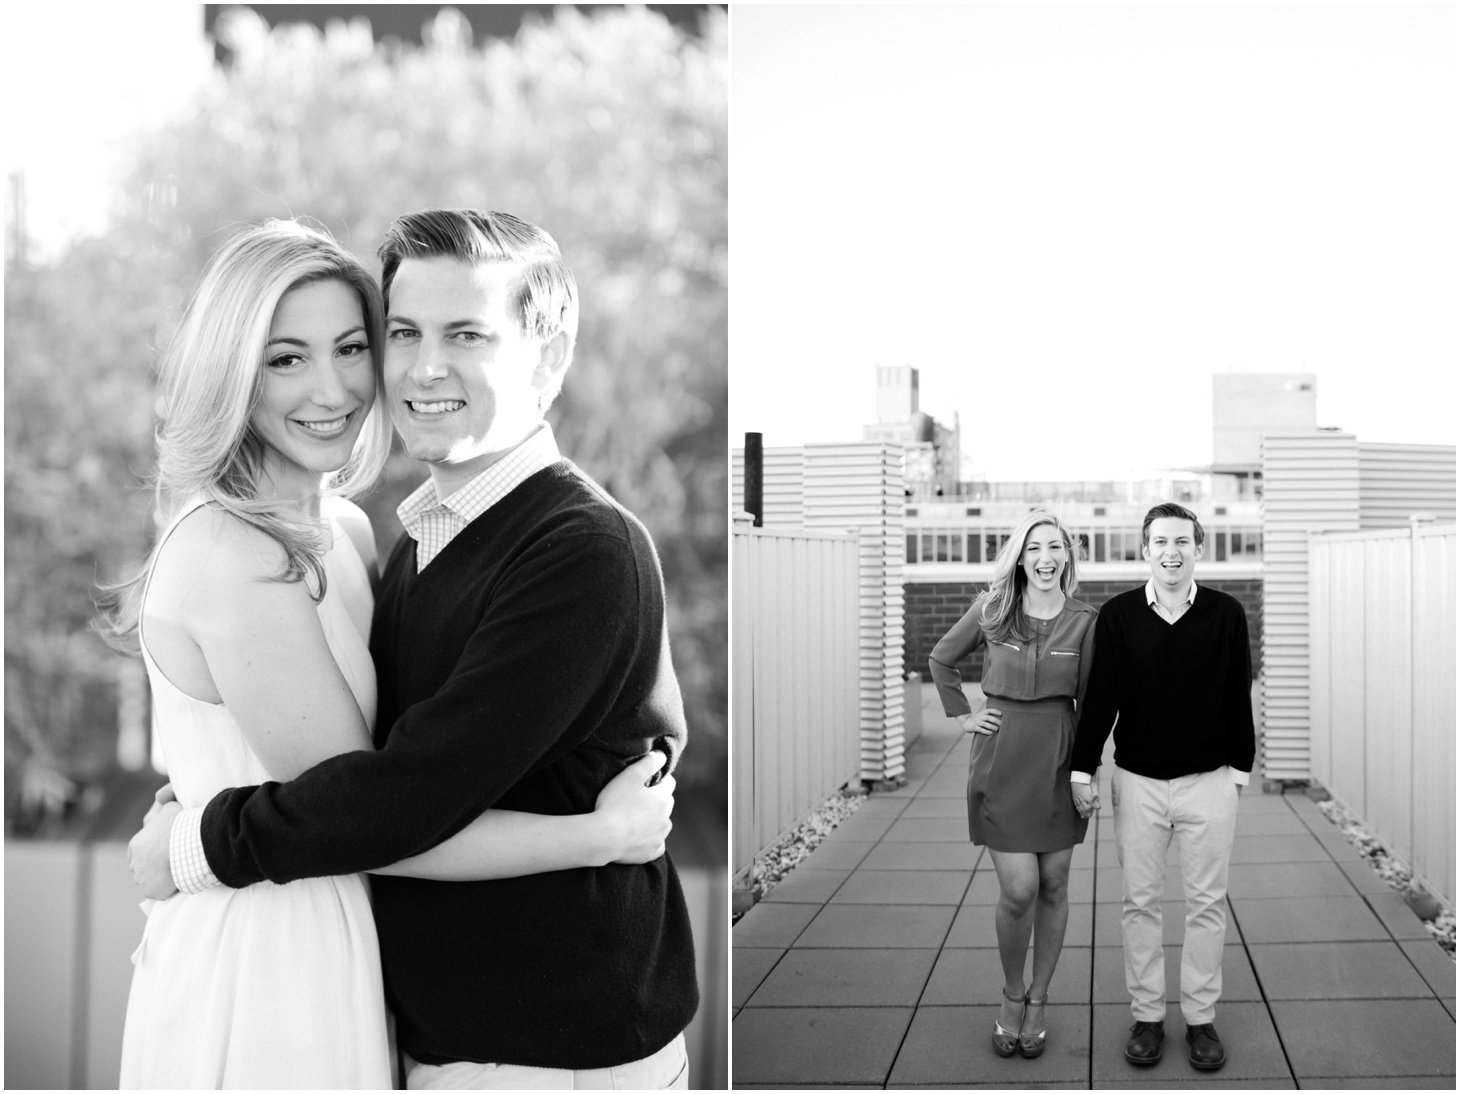 Sunset rooftop engagement session in New York City by Sarah Bradshaw Photography